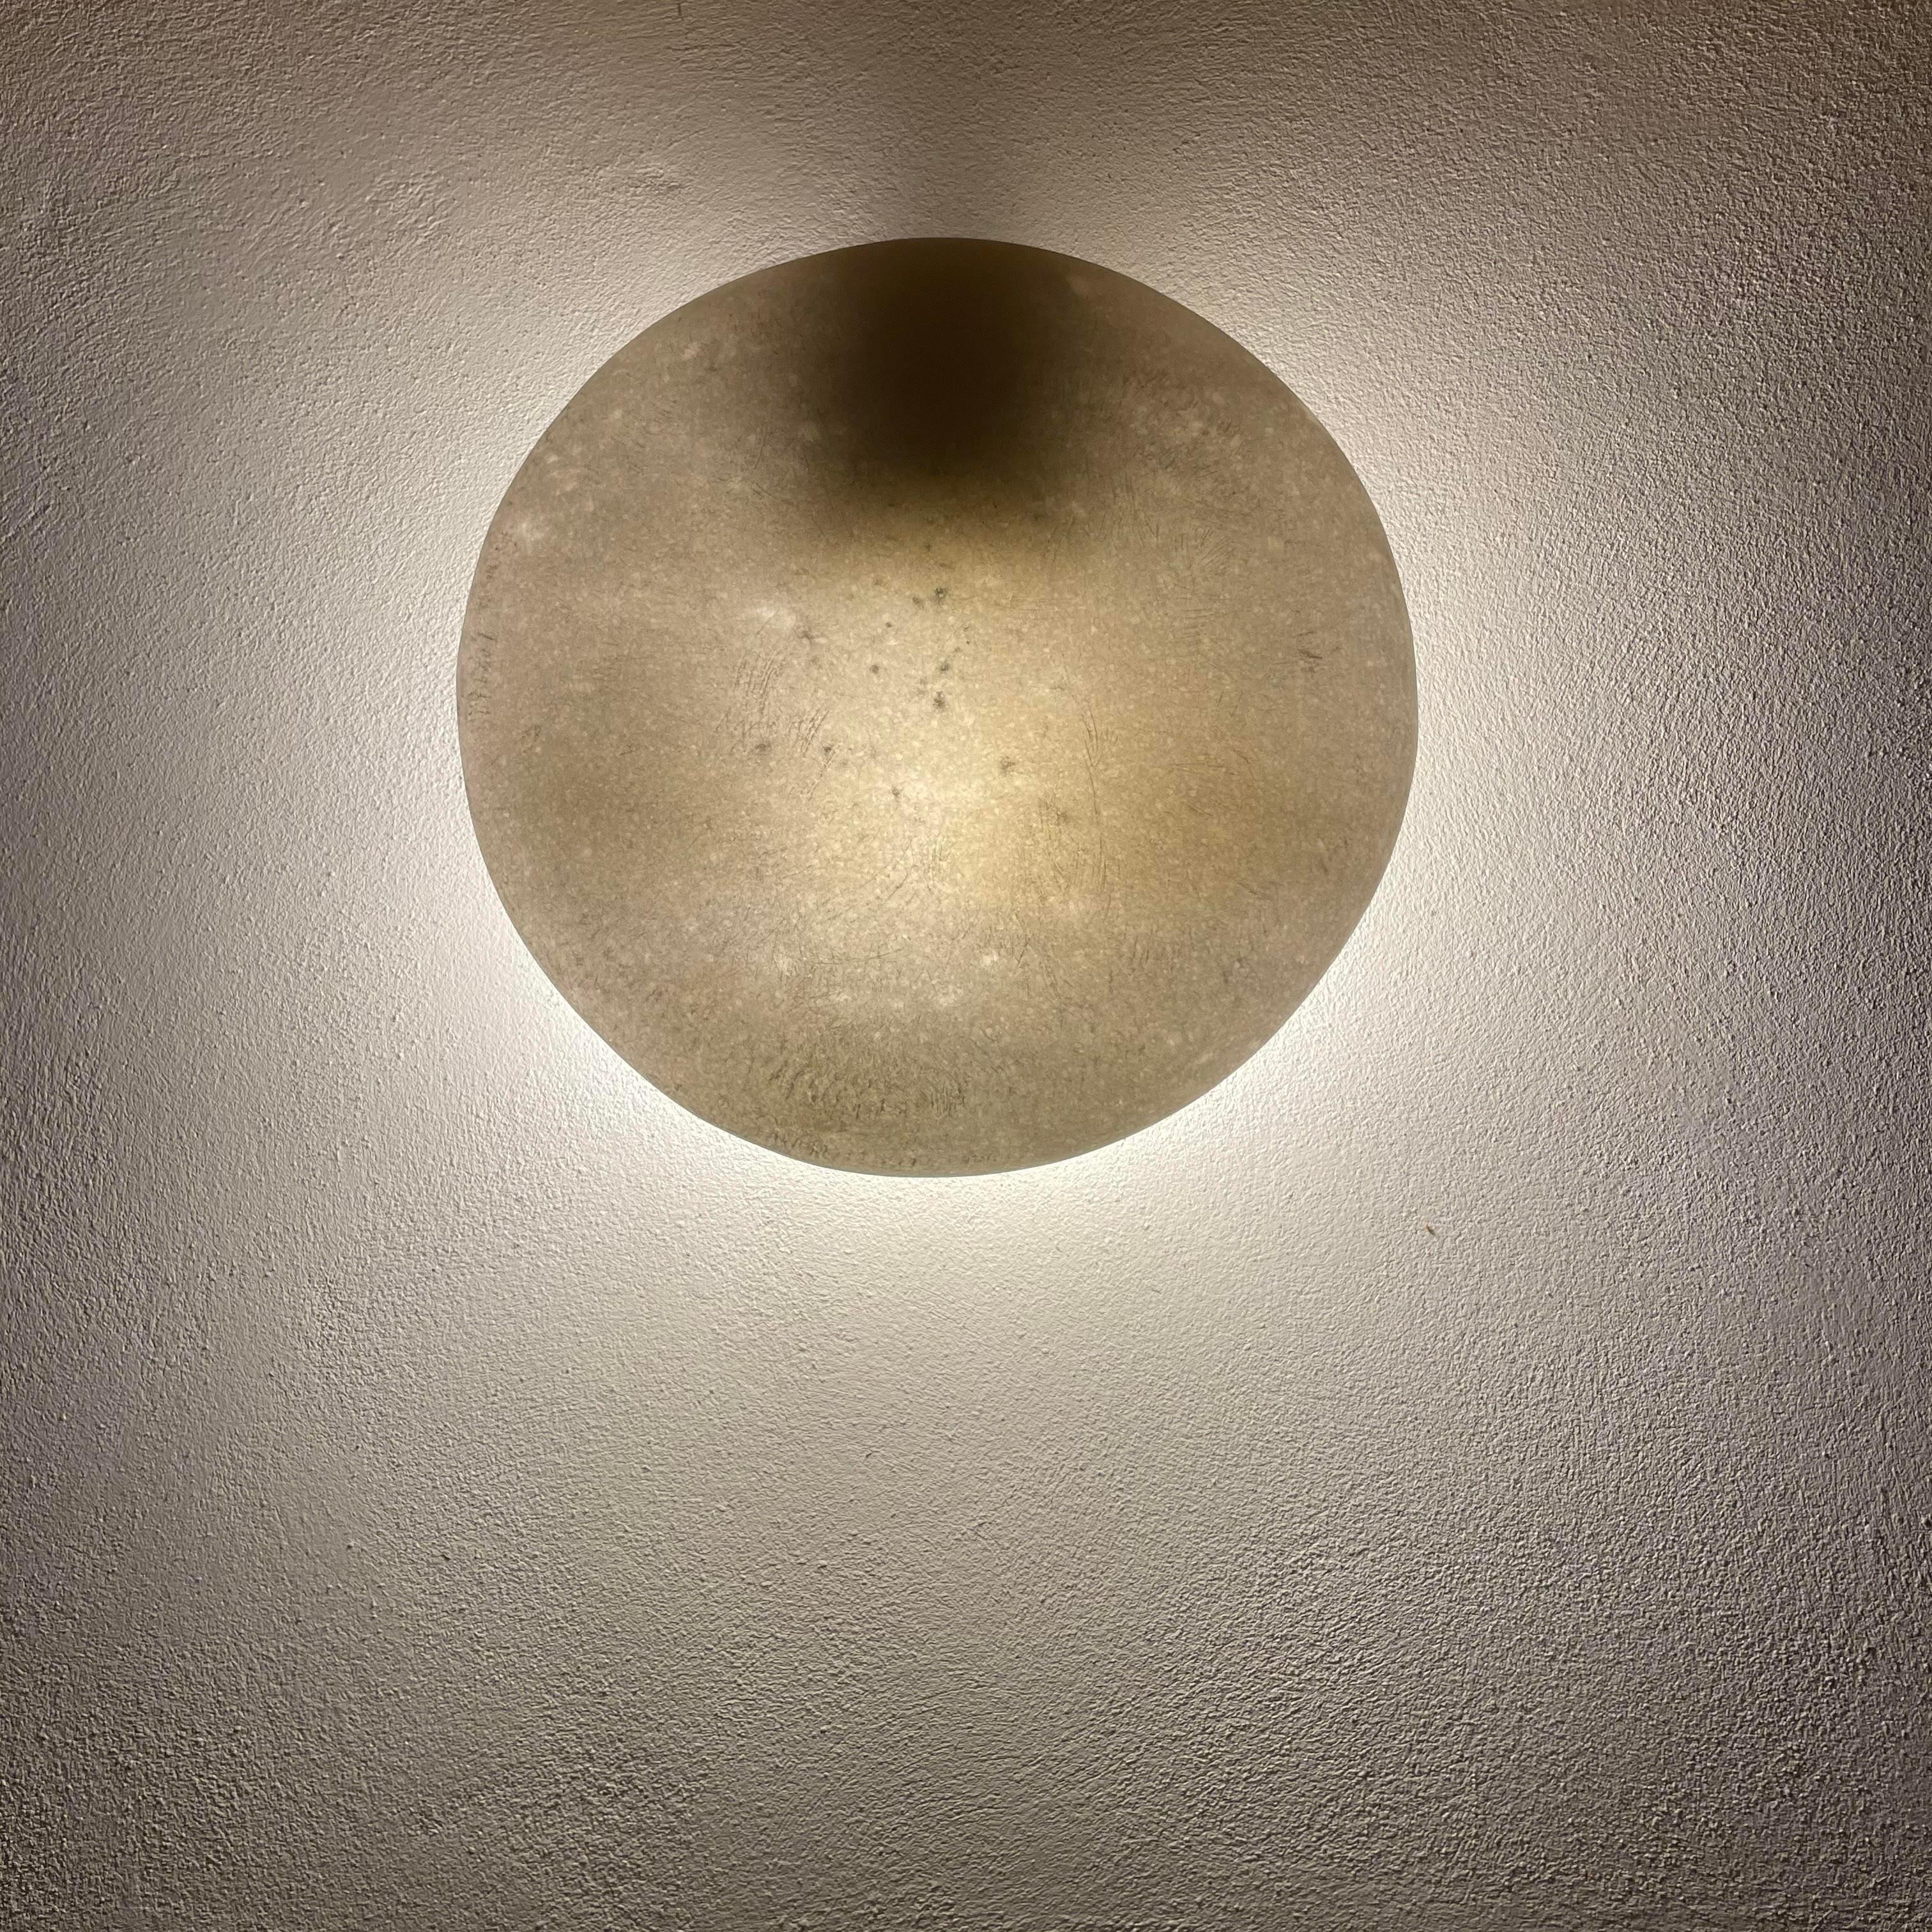 Unique marble wall lamp by Tom von Kaenel
Dimensions: Ø 32 x D 14 cm
Materials: Marble

All the artworks of Tom von Kaenel are unique, handcrafted by himself.
The stones all come from the surrounding marble quarries of the island. The Naxian